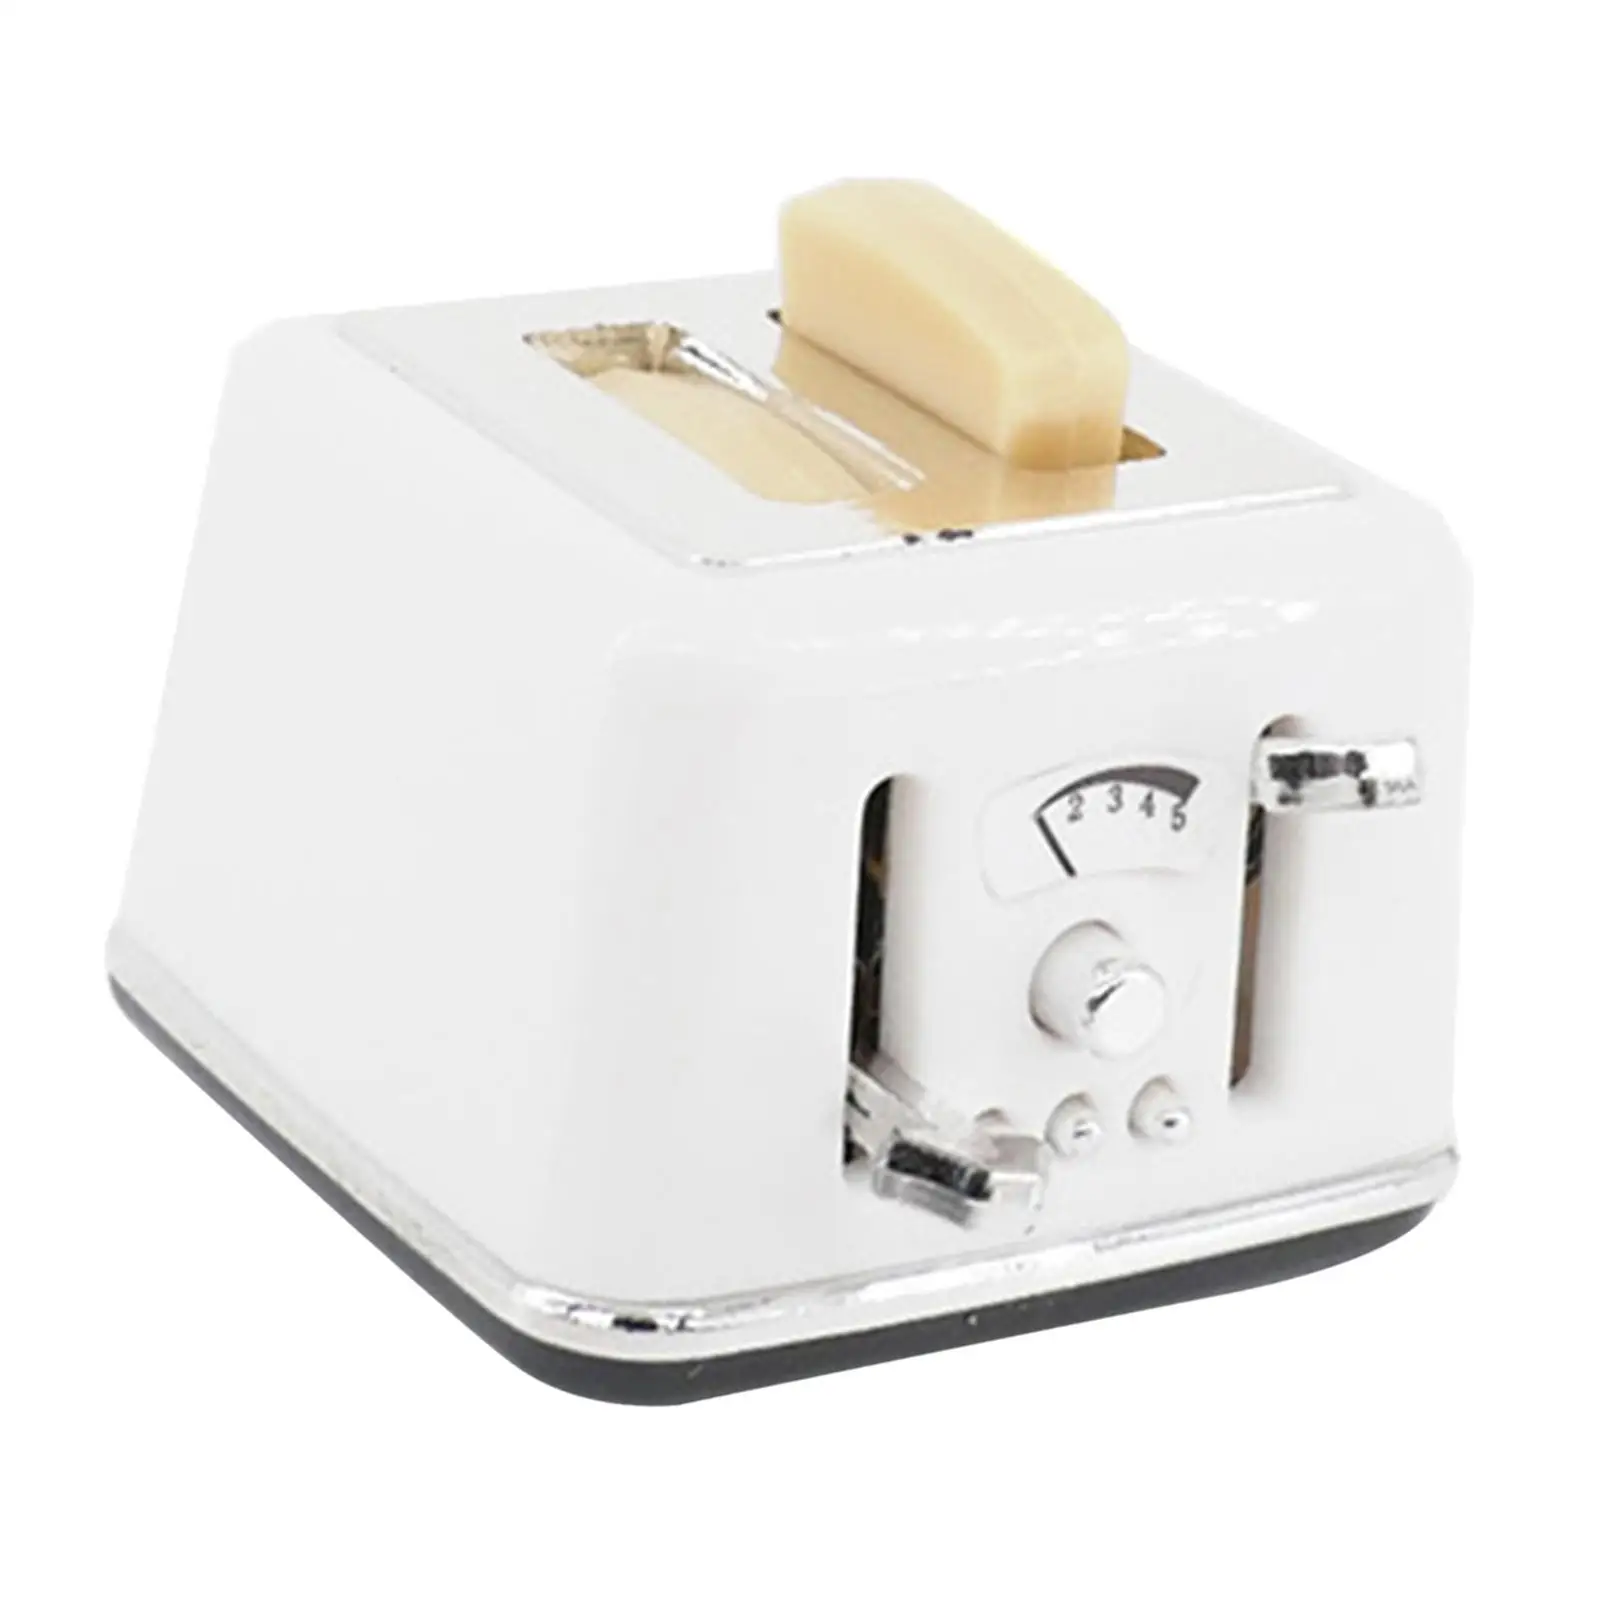 Miniature Toaster Handcrafted Simulated for Kitchen Decoration Replacement